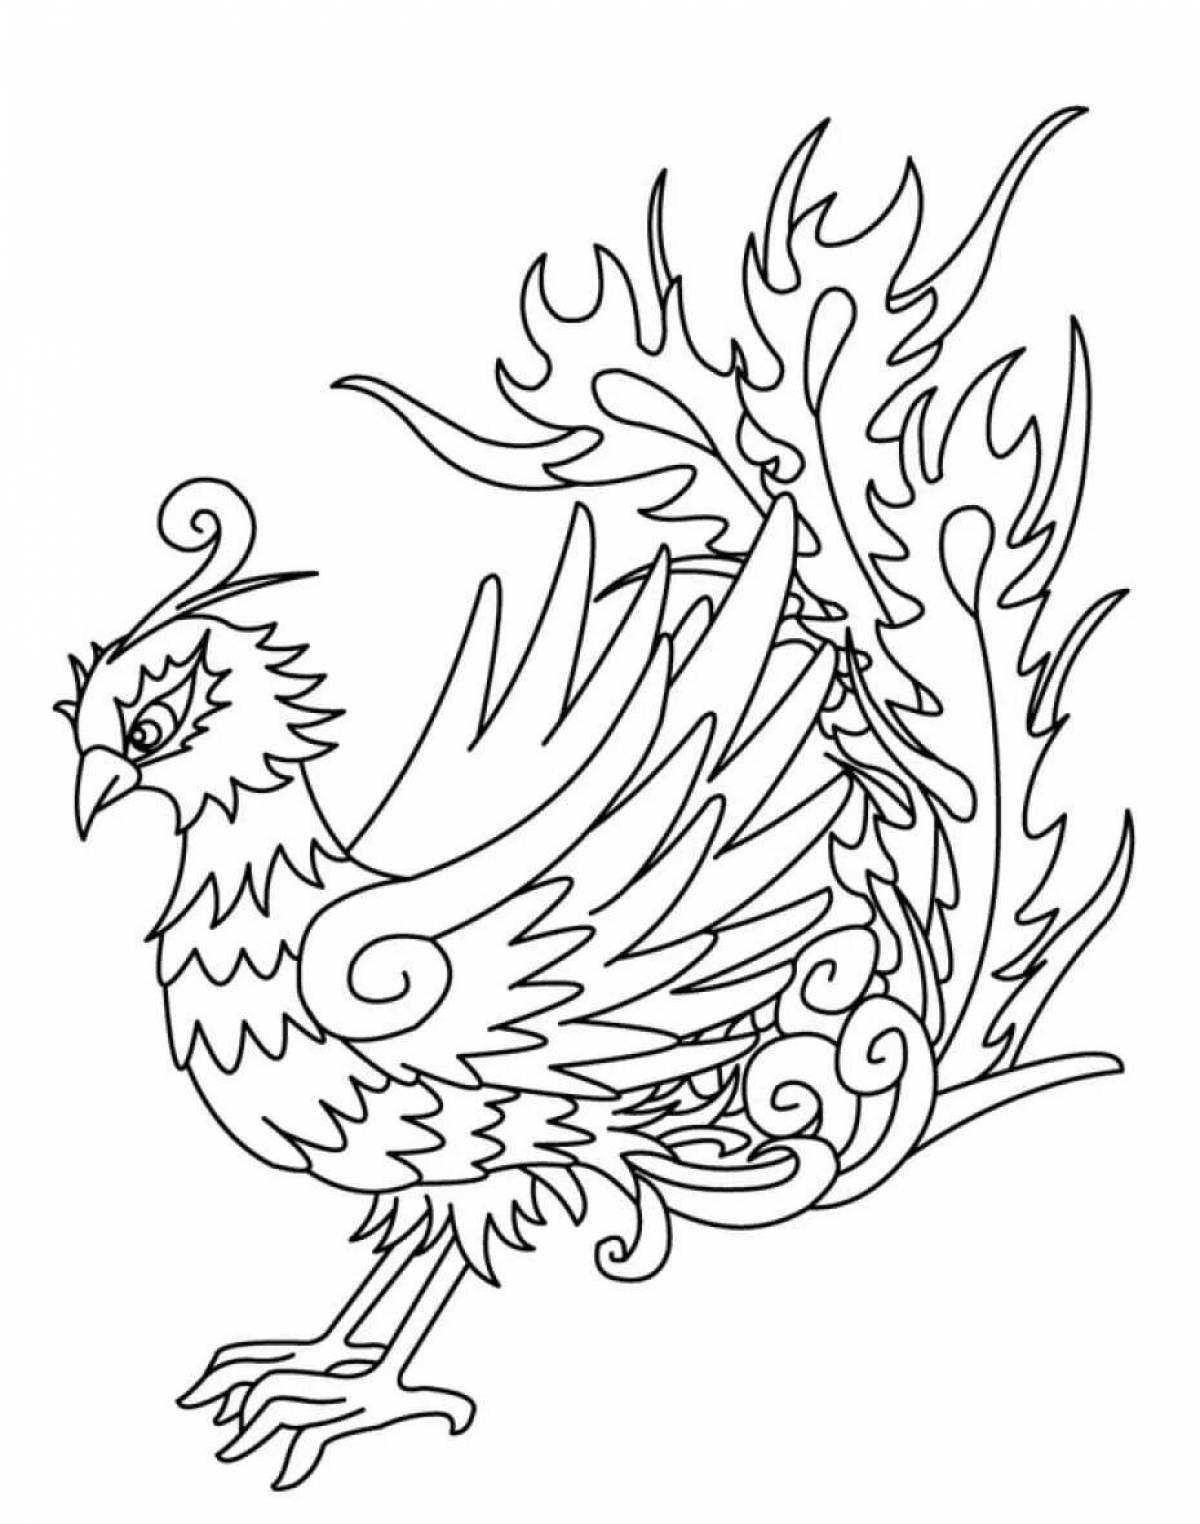 Magic bird mysterious coloring page